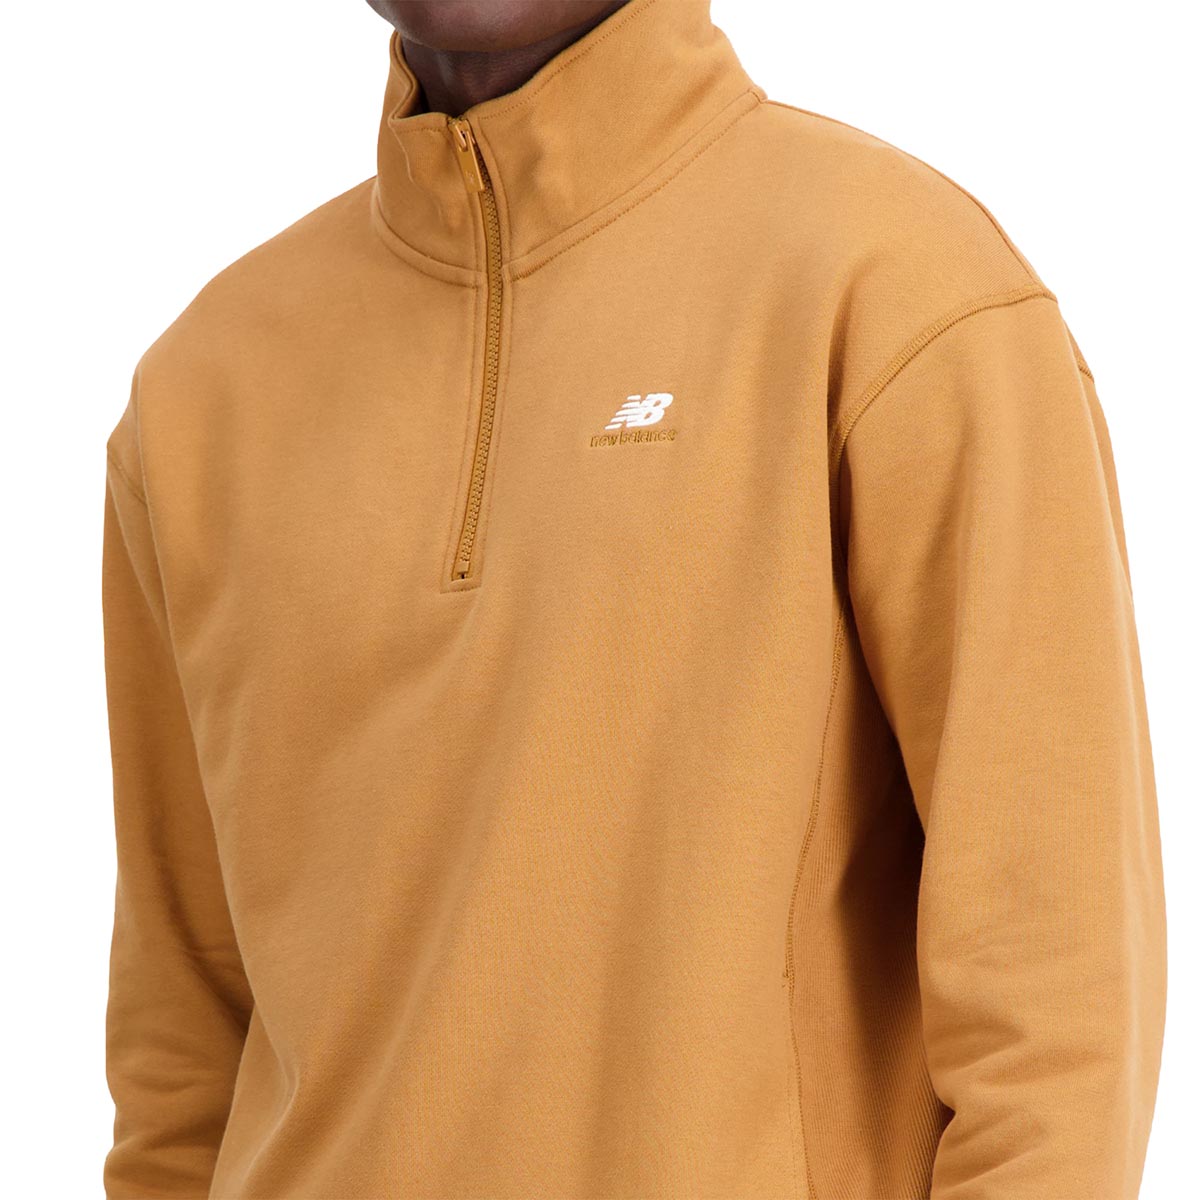 NEW BALANCE - ATHLETICS REMASTERED FRENCH TERRY 1/4 ZIP